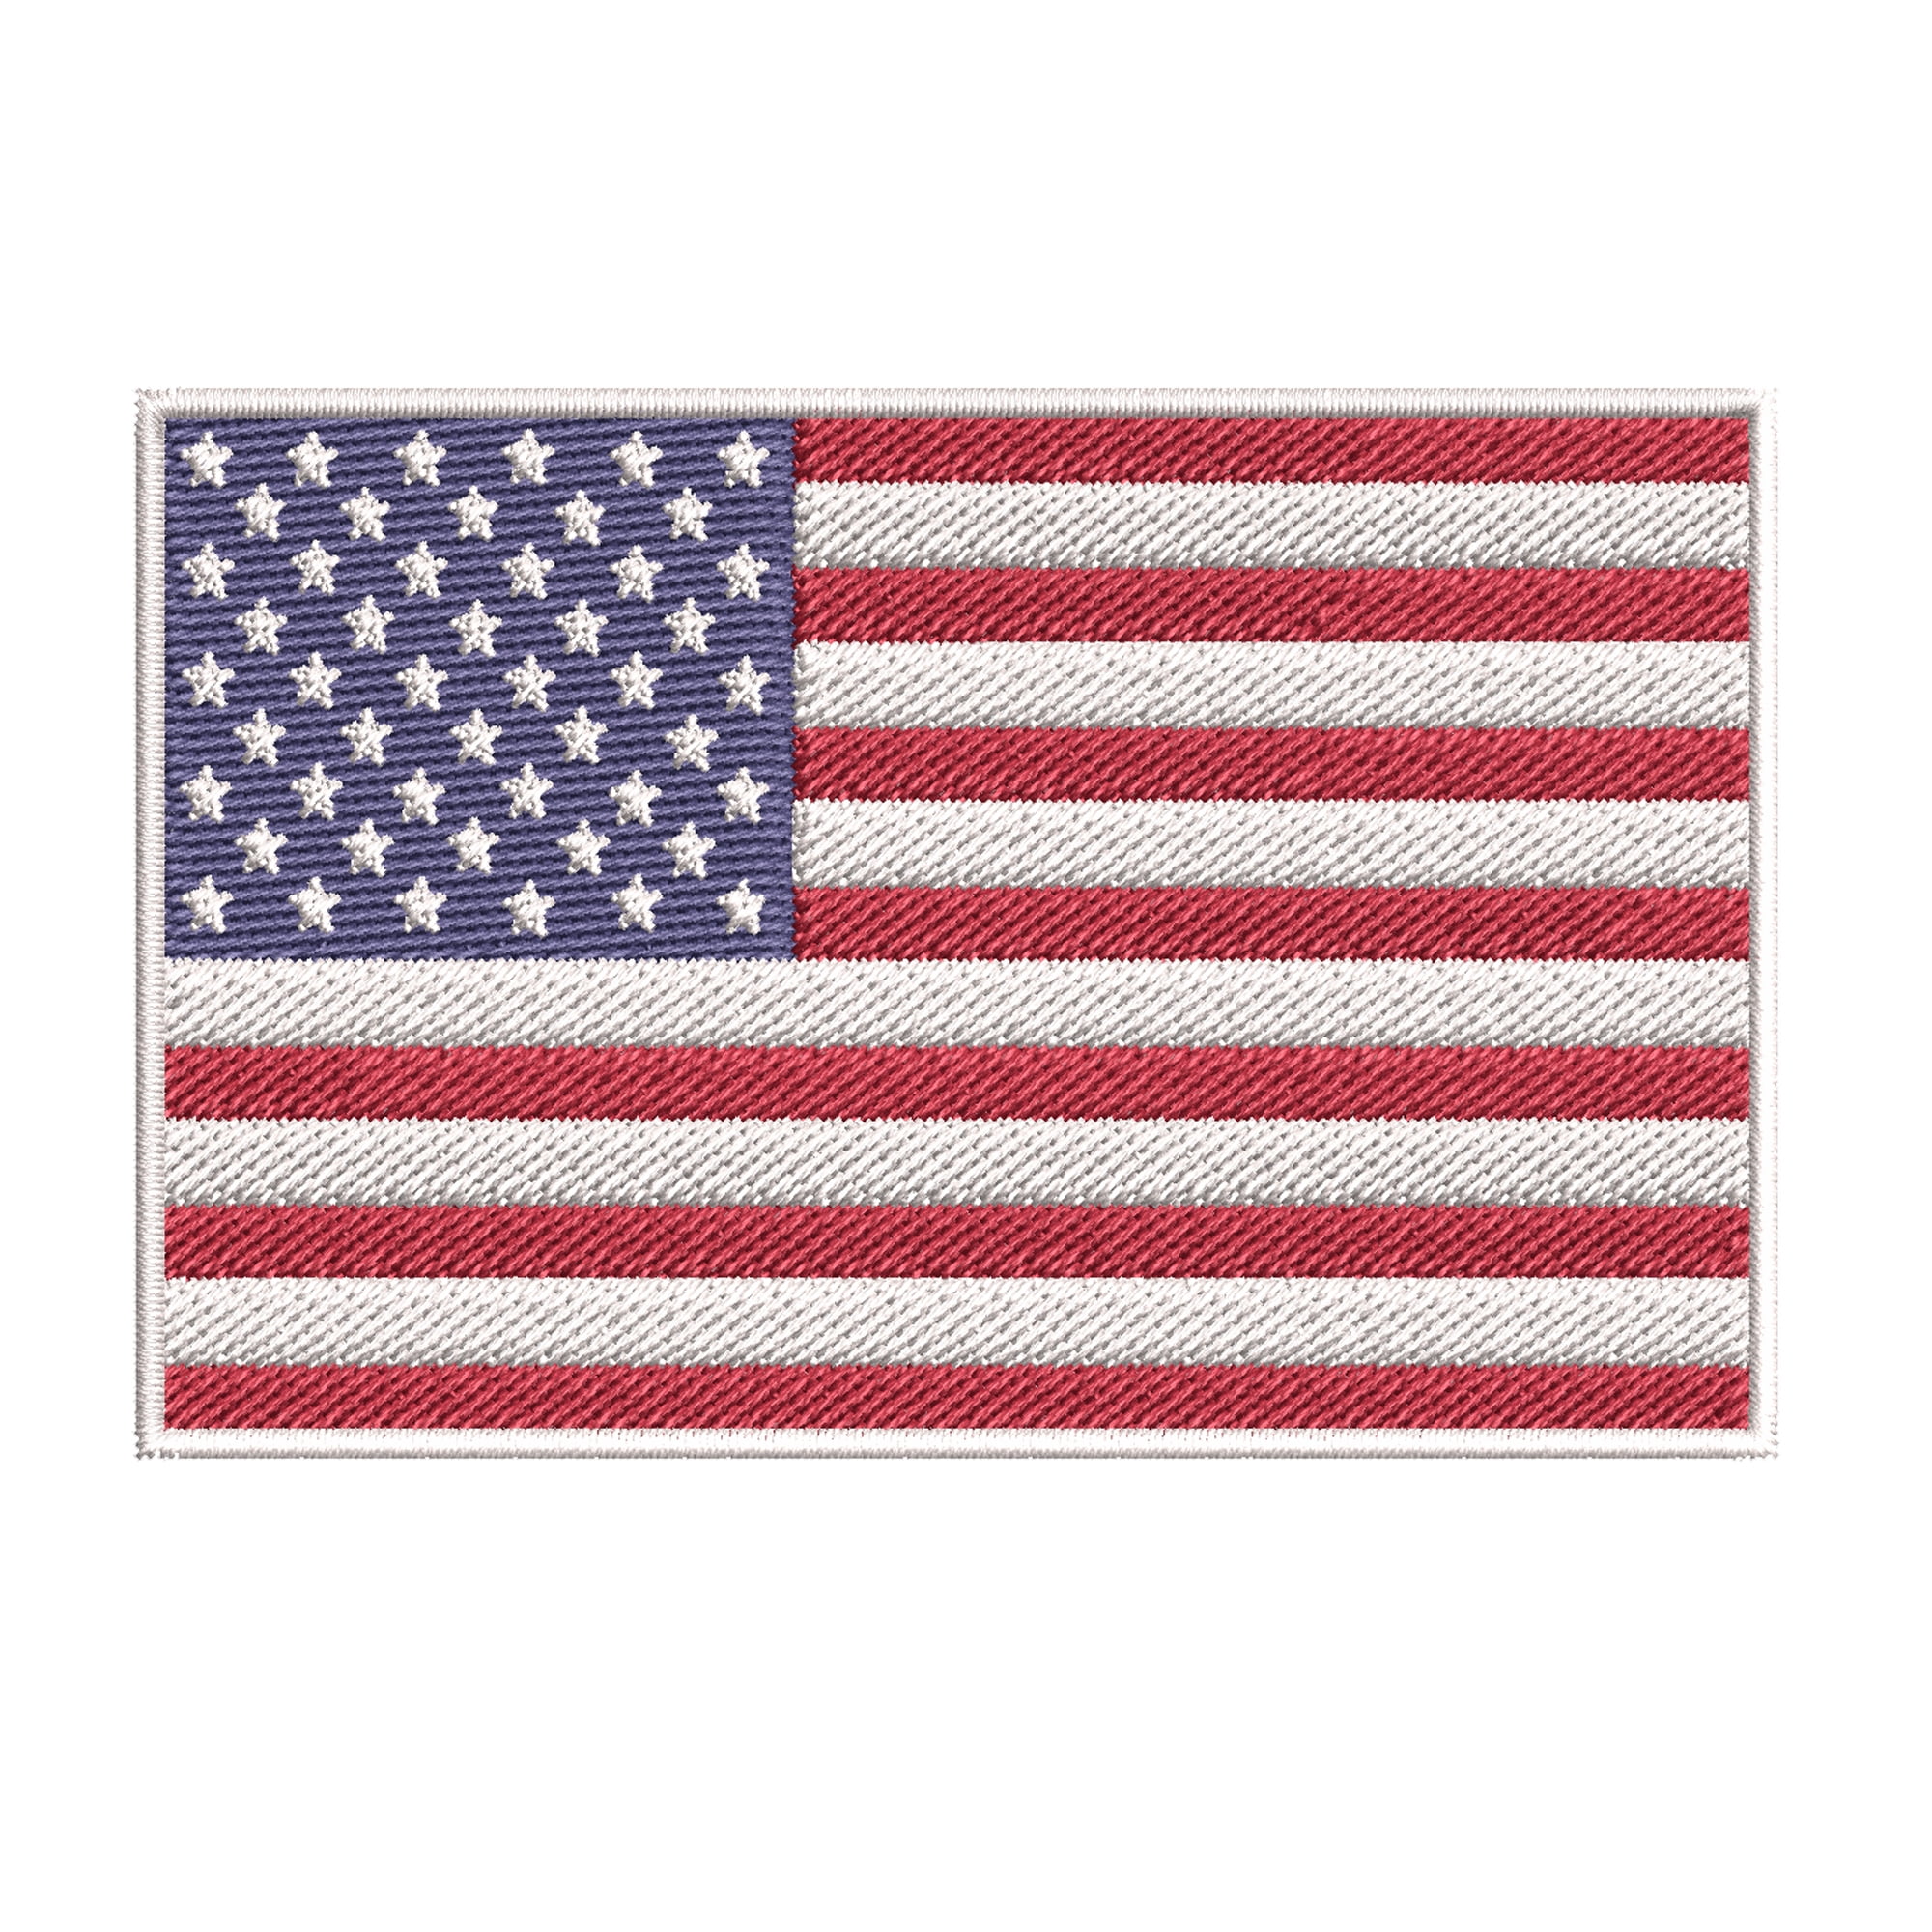 Pink & White American Flag Patch 3 1/2 x 2 100% Embroidered New Free Shipping 